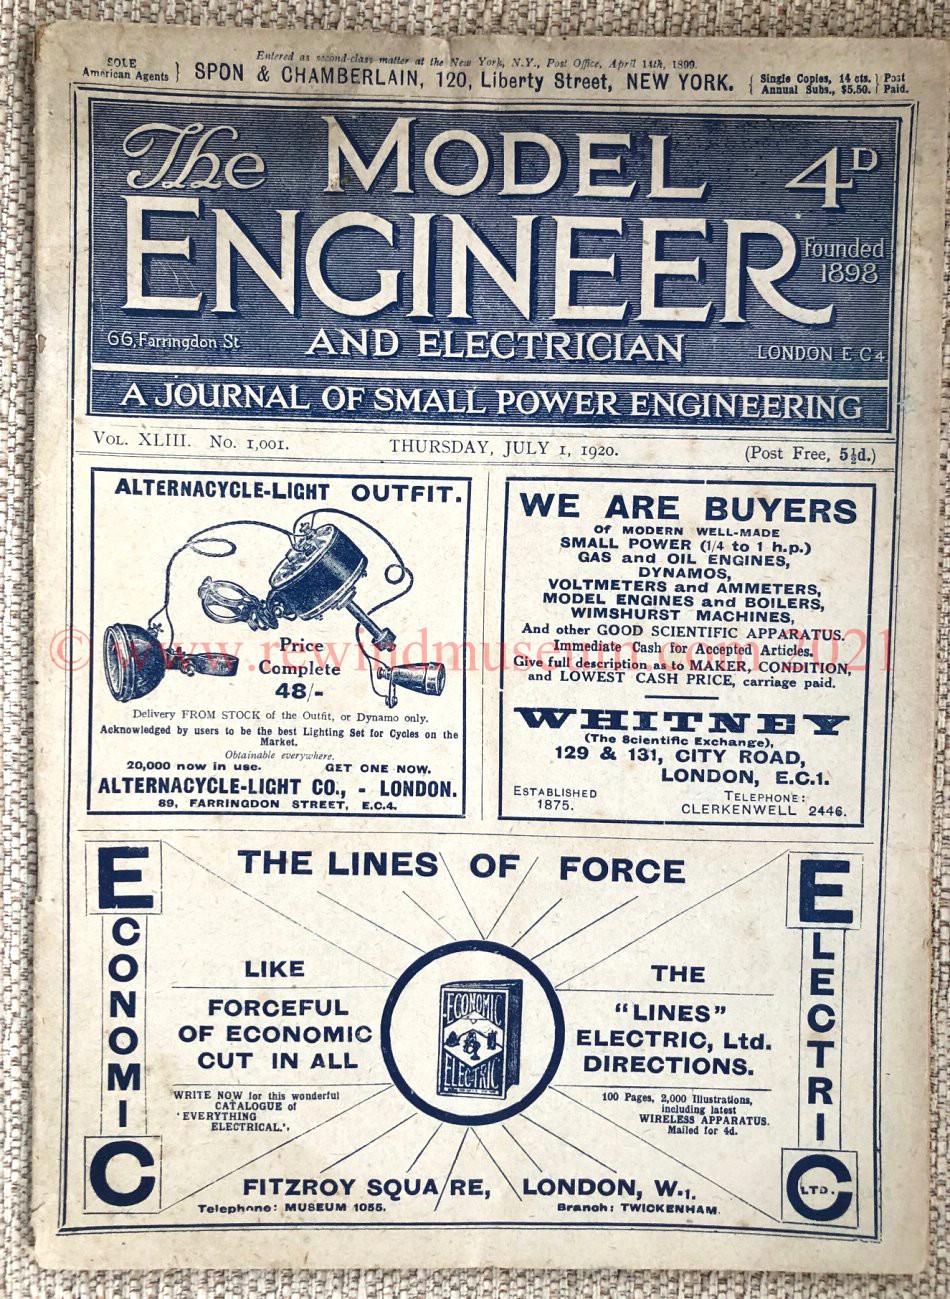 The Model Engineer. July 1920.